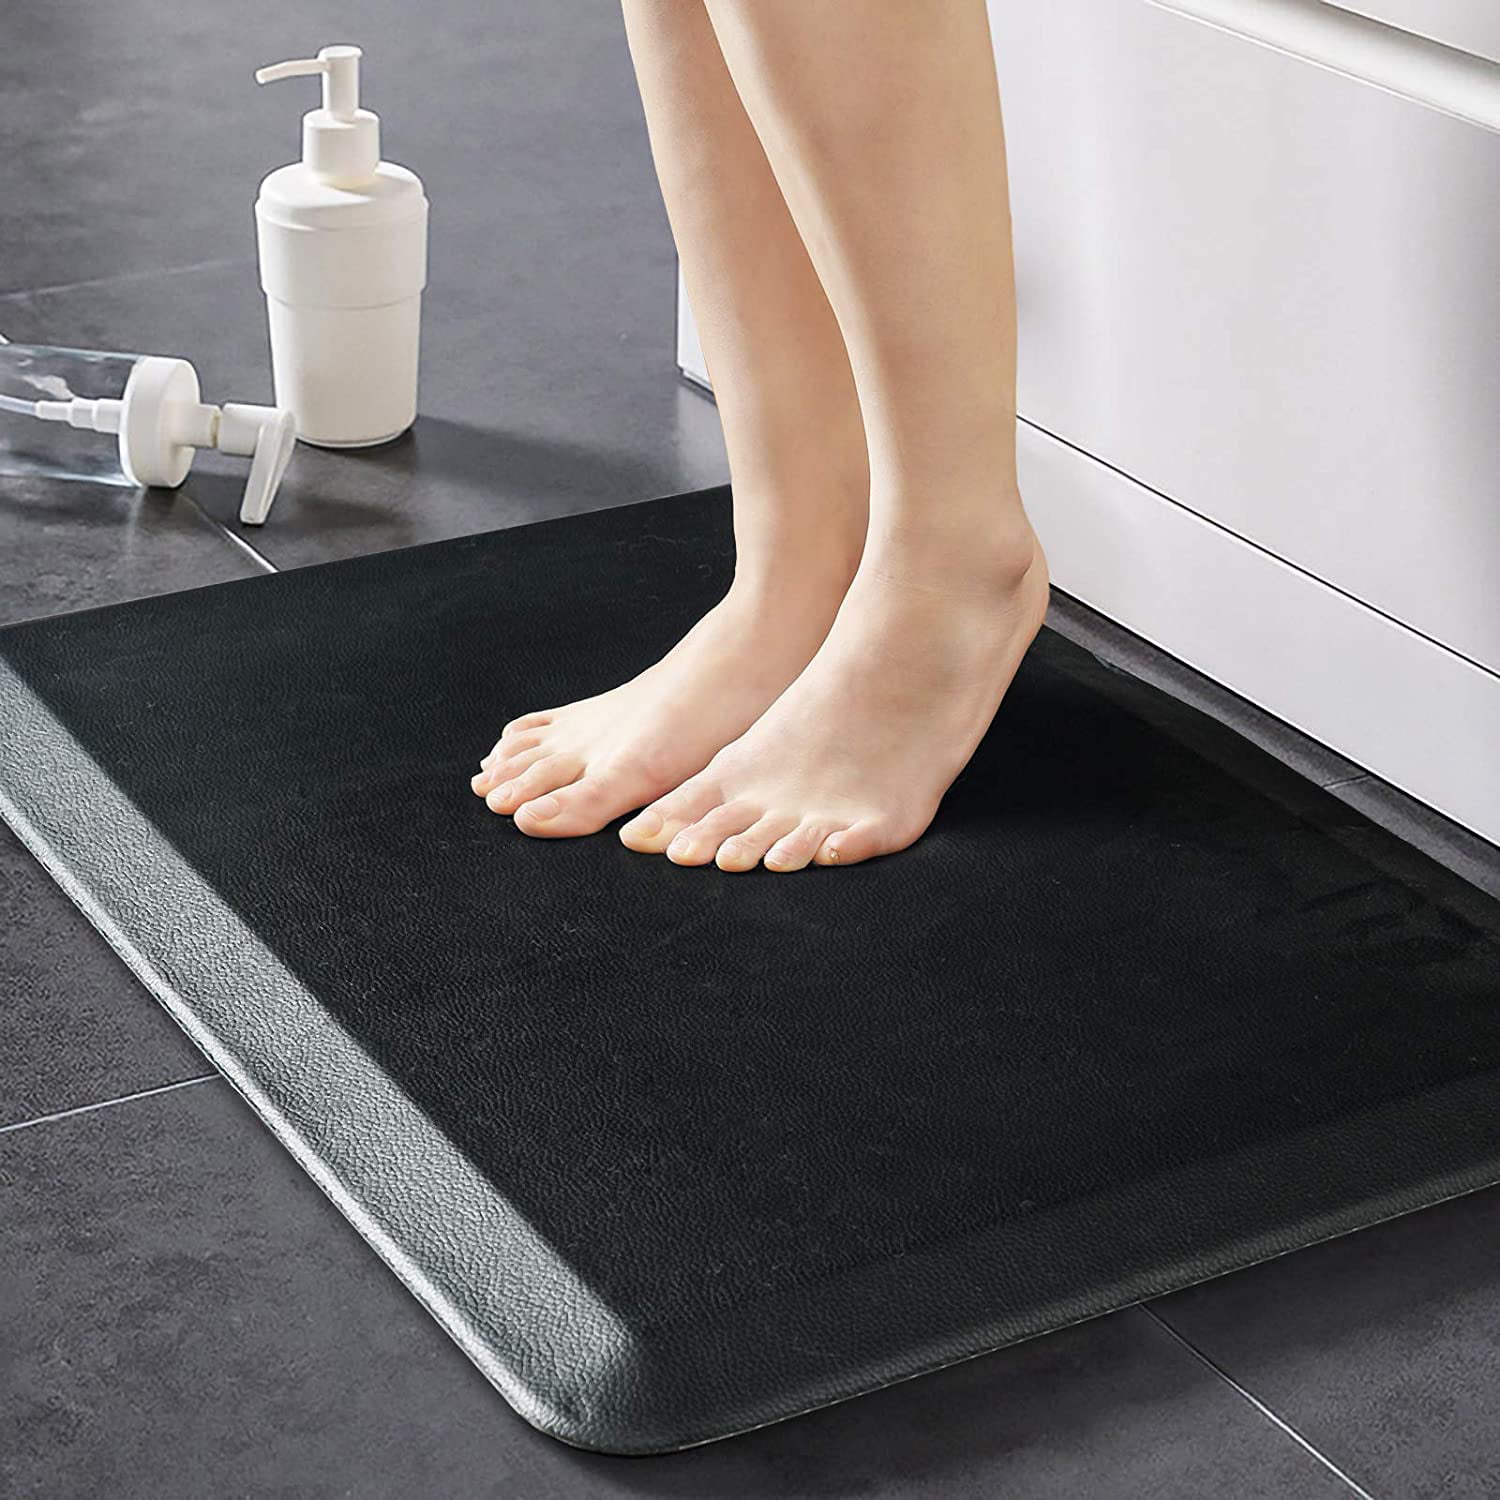 Beige Extra Support and Thick Phthalate Free Ergonomically Engineered 32x20 GORILLA GRIP Original Premium Anti-Fatigue Comfort Mat Ships Flat Kitchen and Office Standing Desk